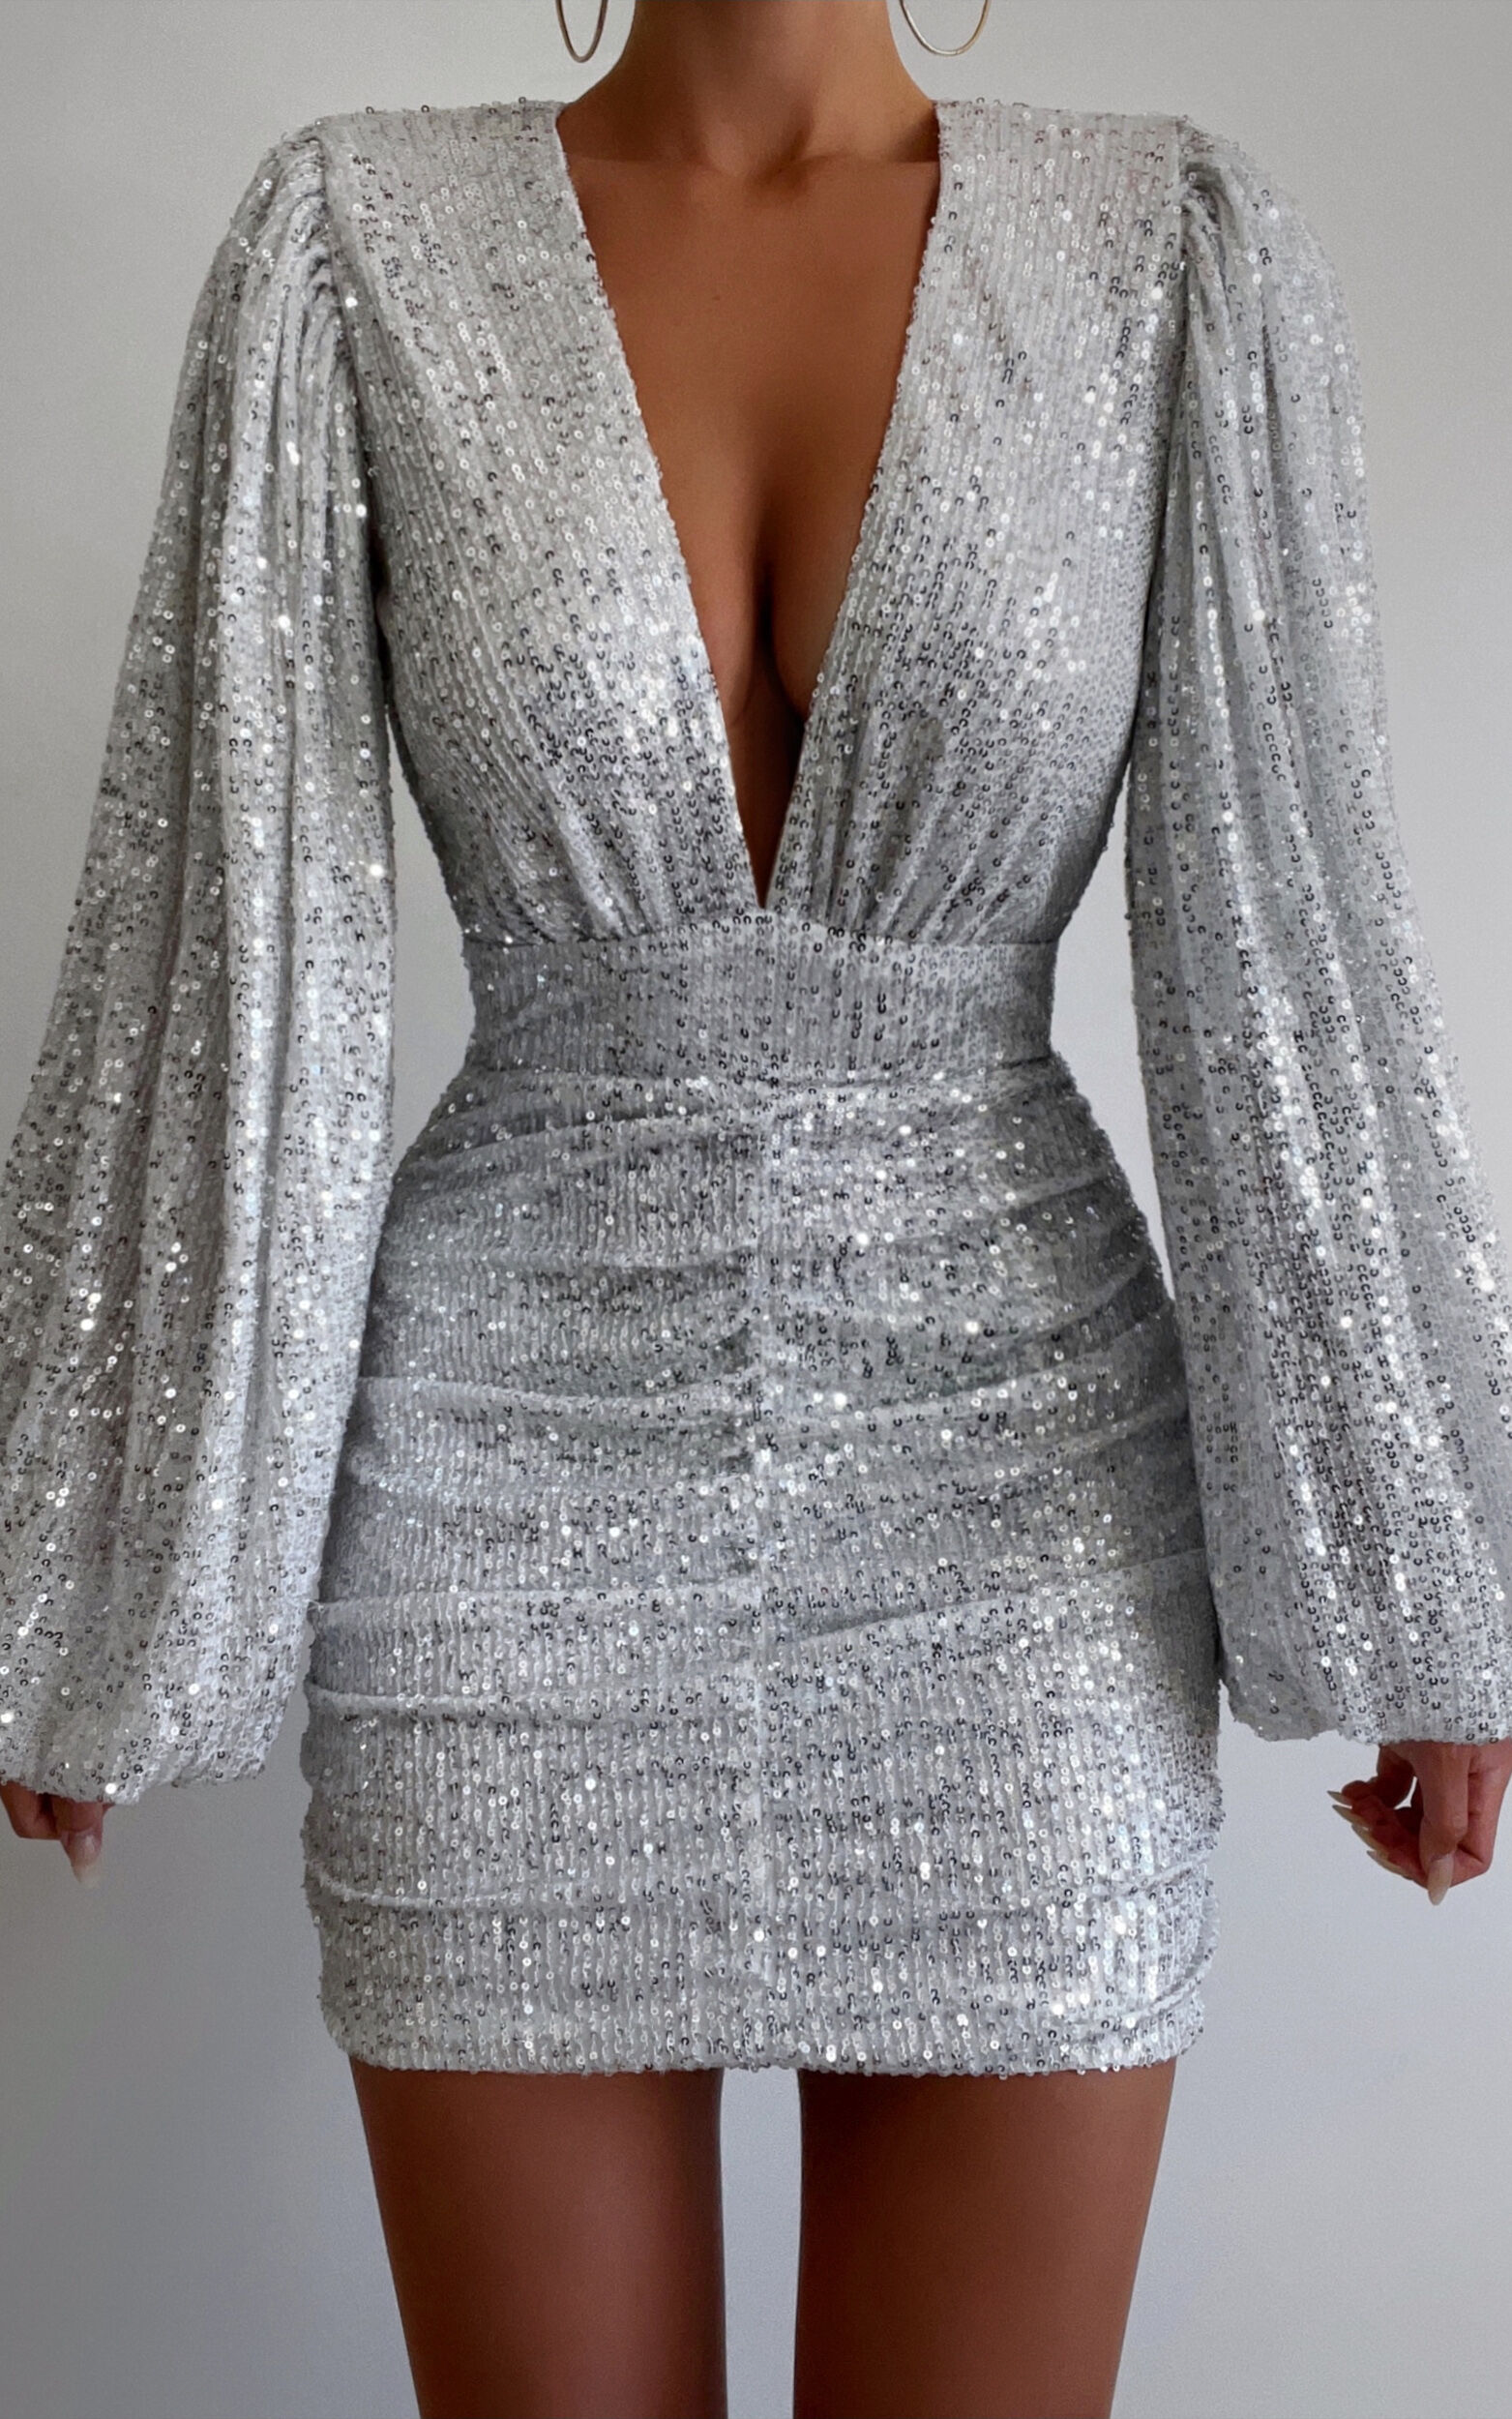 Rhylee Long Sleeve Ruched Mini Dress in Silver Sequin - 04, SLV1, super-hi-res image number null